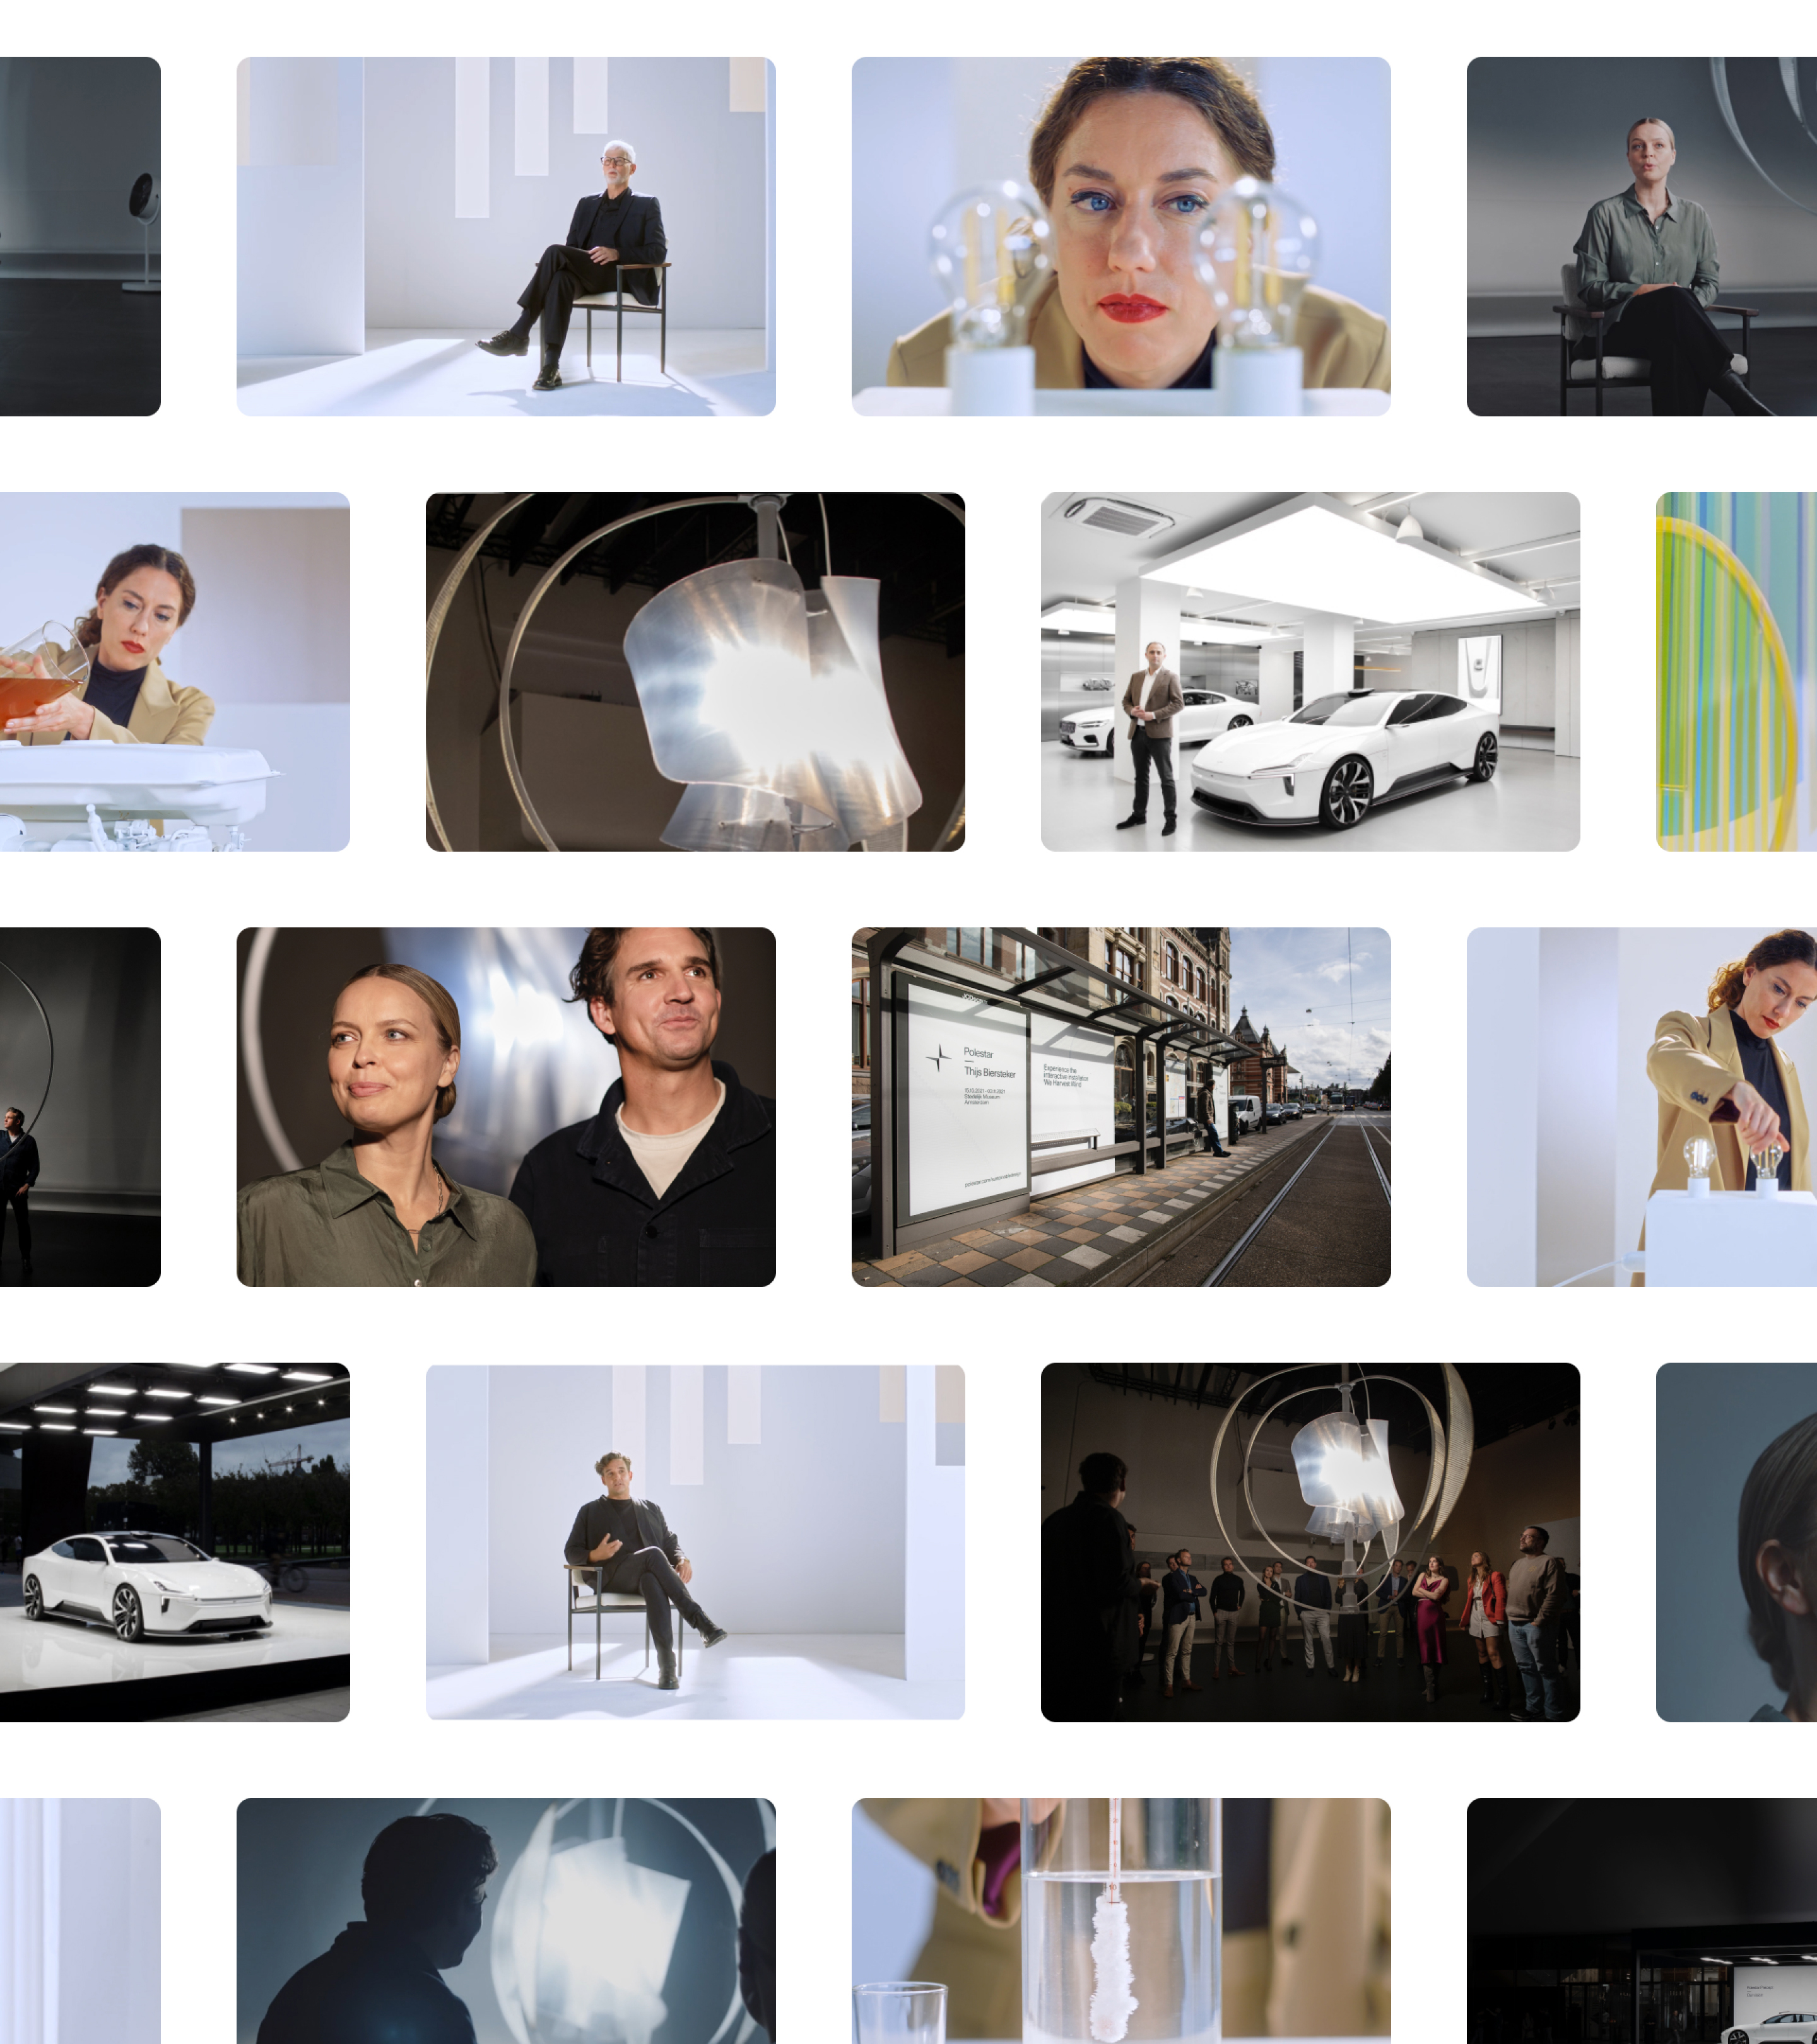 Grid with various images related to Polestar Woven, such as; the Solar Designer Marjan van Aubel and Polestar's Head of sustainability Frederika Klaren.